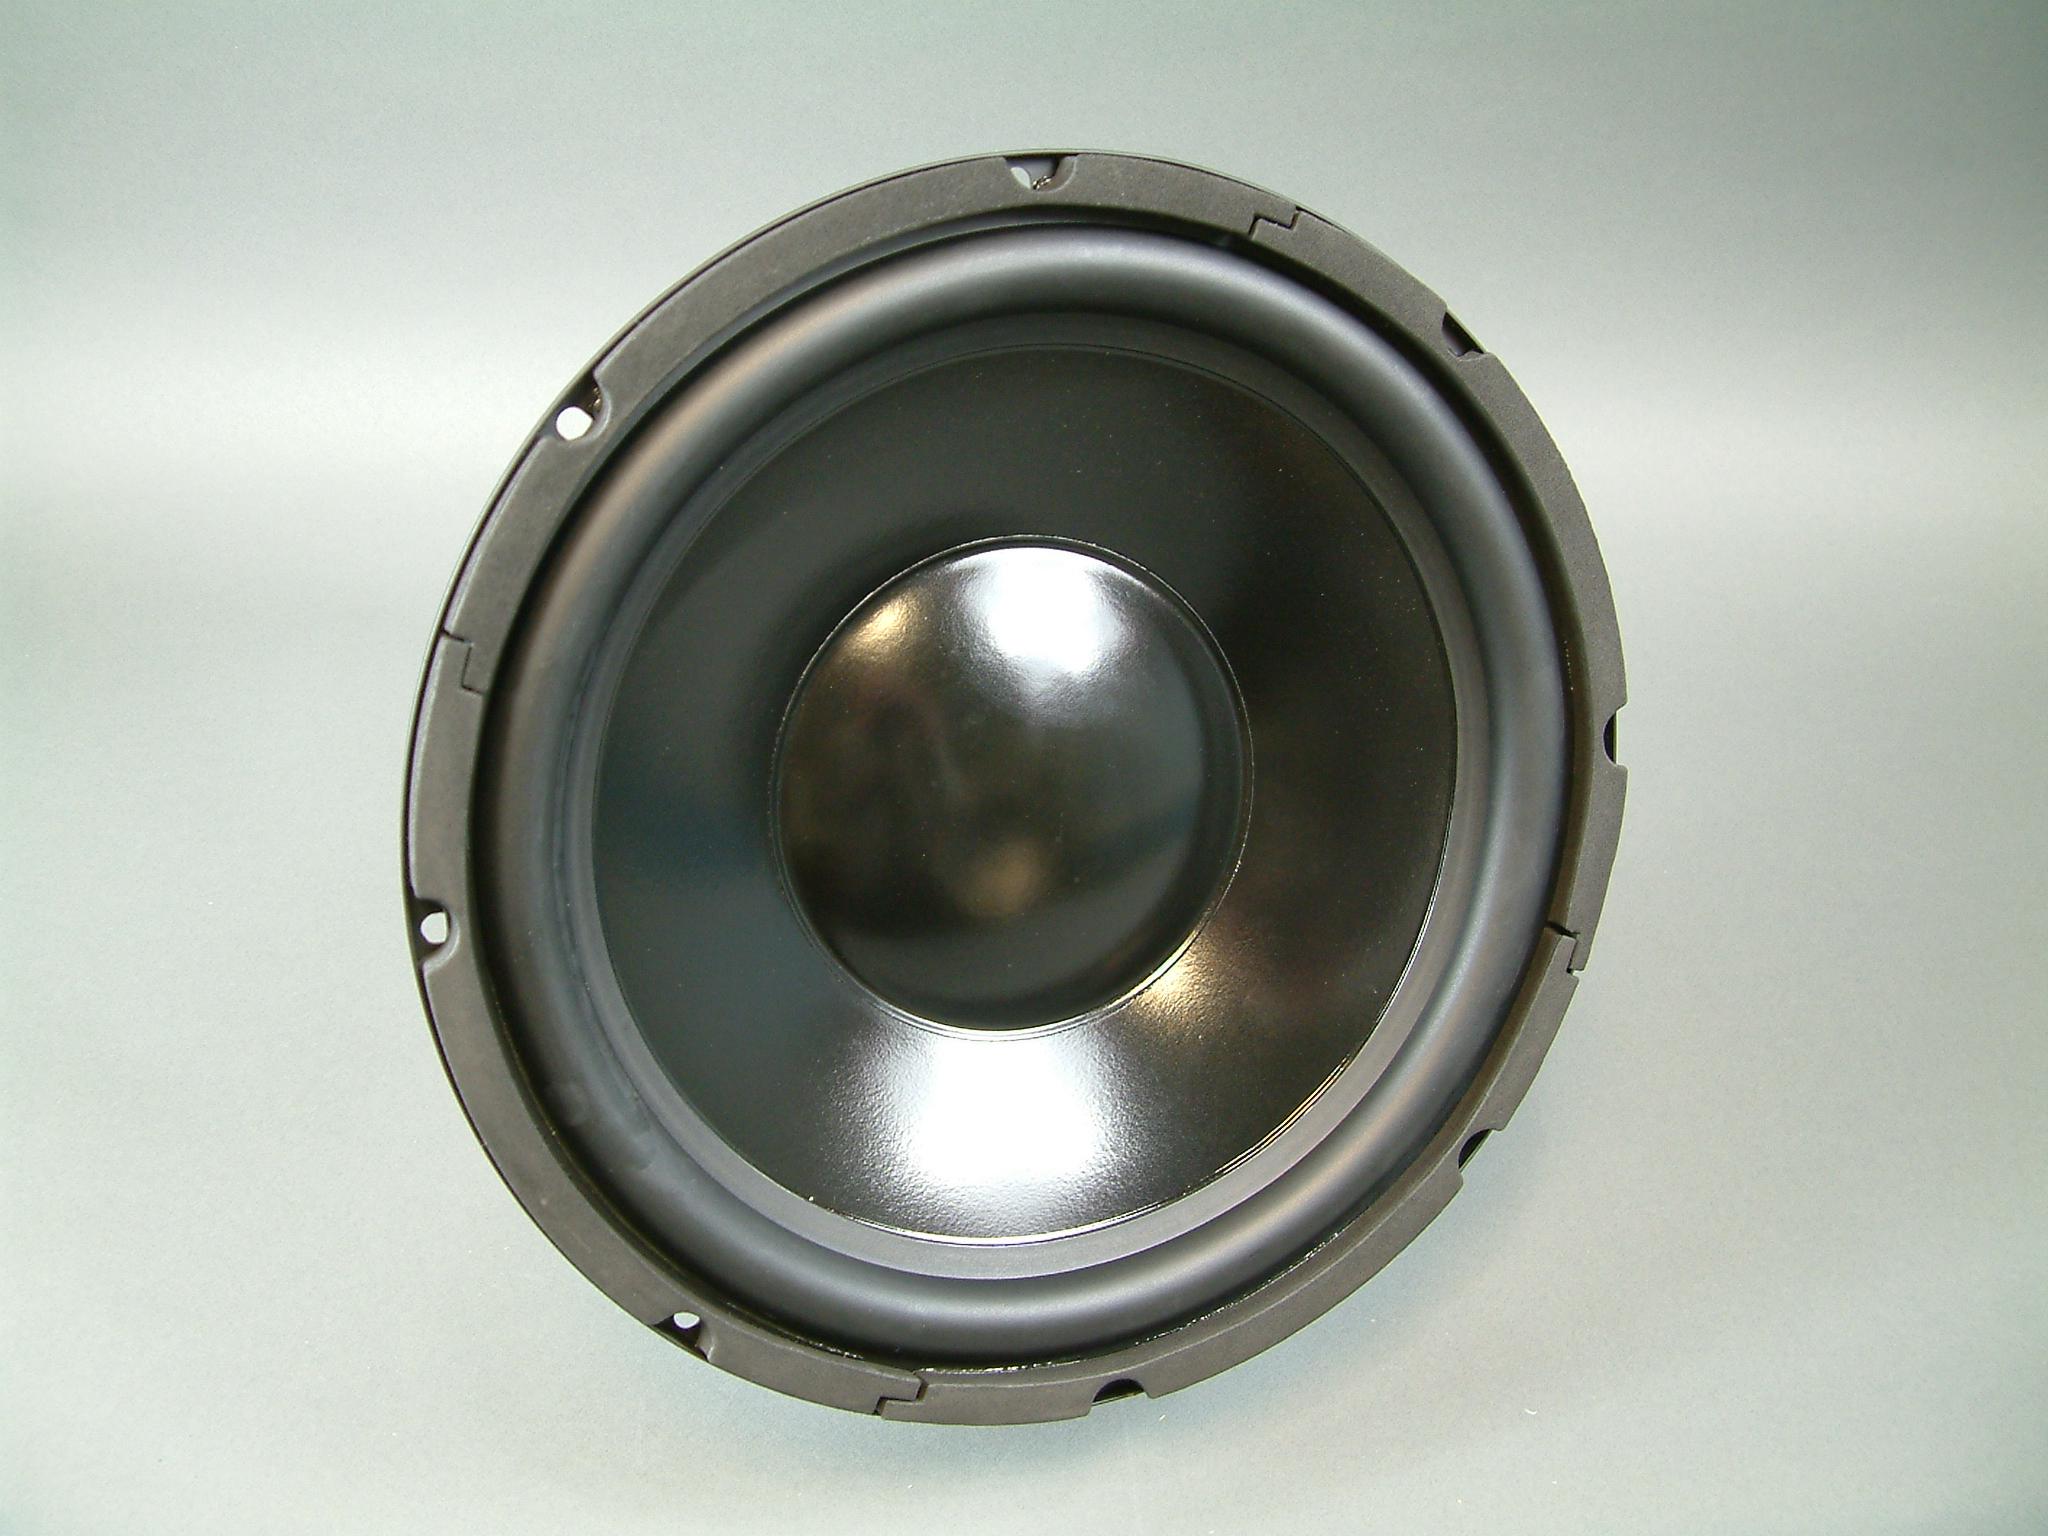 pioneer 8 inch subwoofer